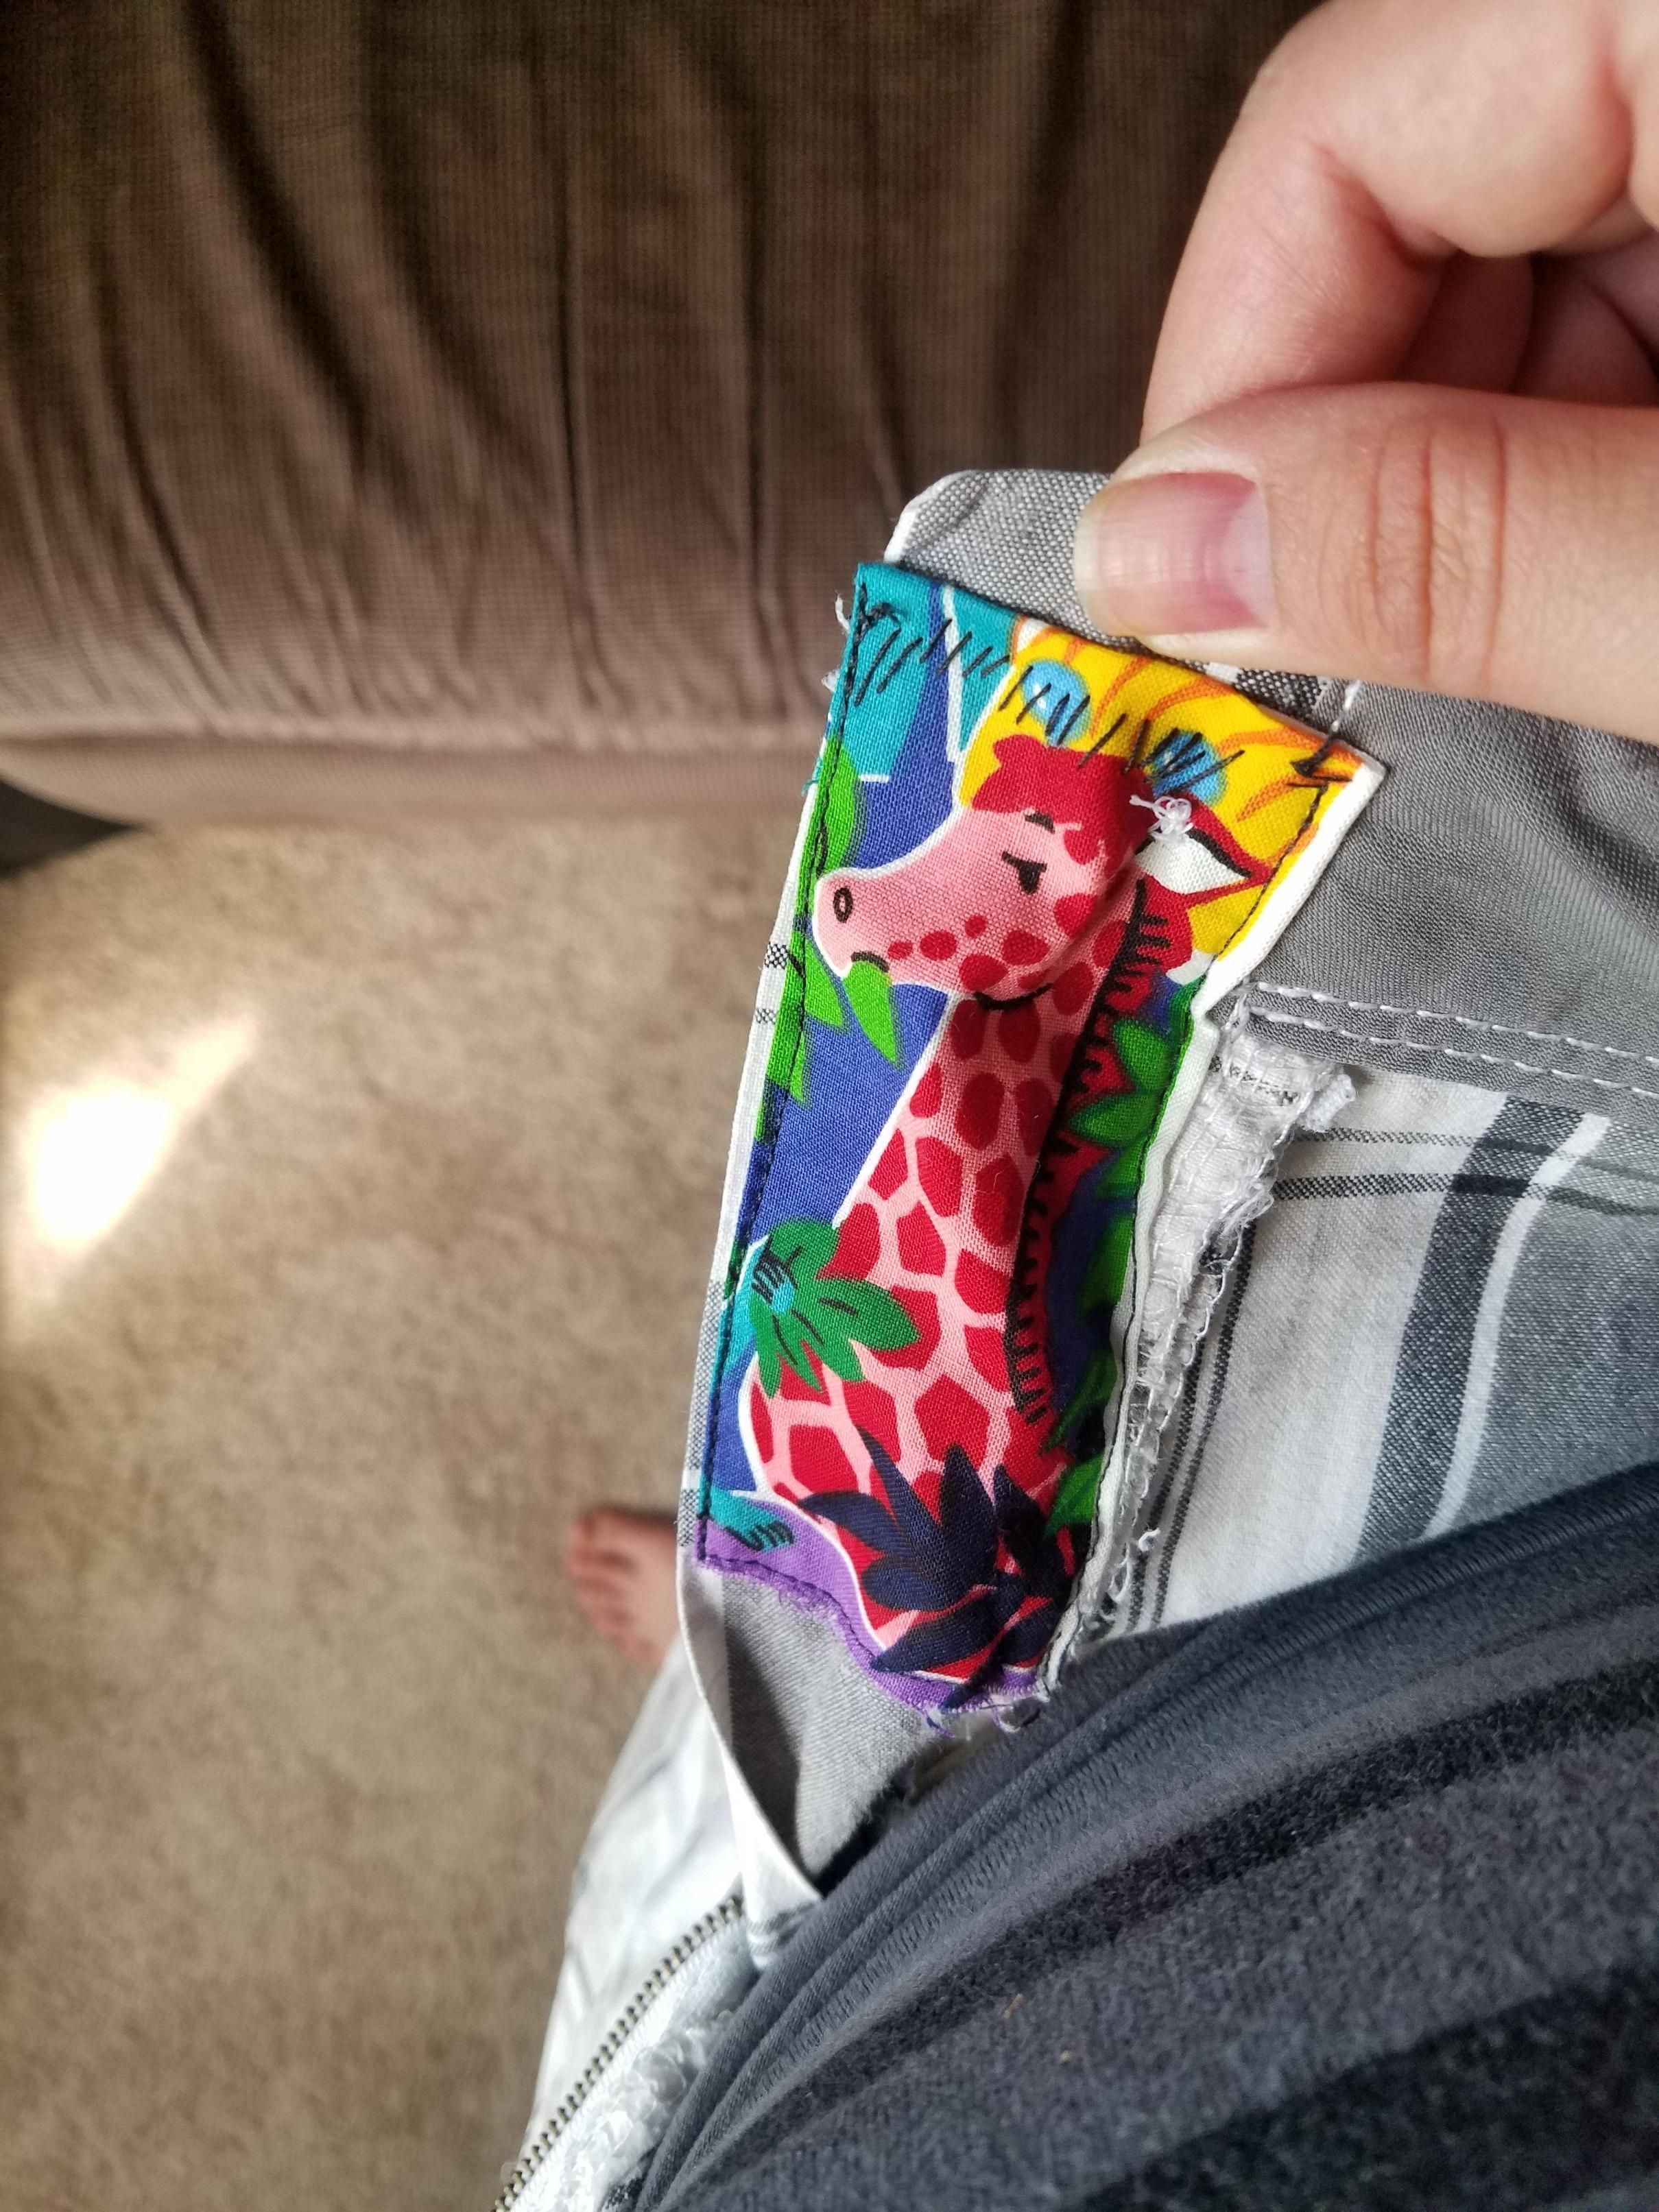 Boyfriend asked me to patch his shorts, left a little surprise on the inside...